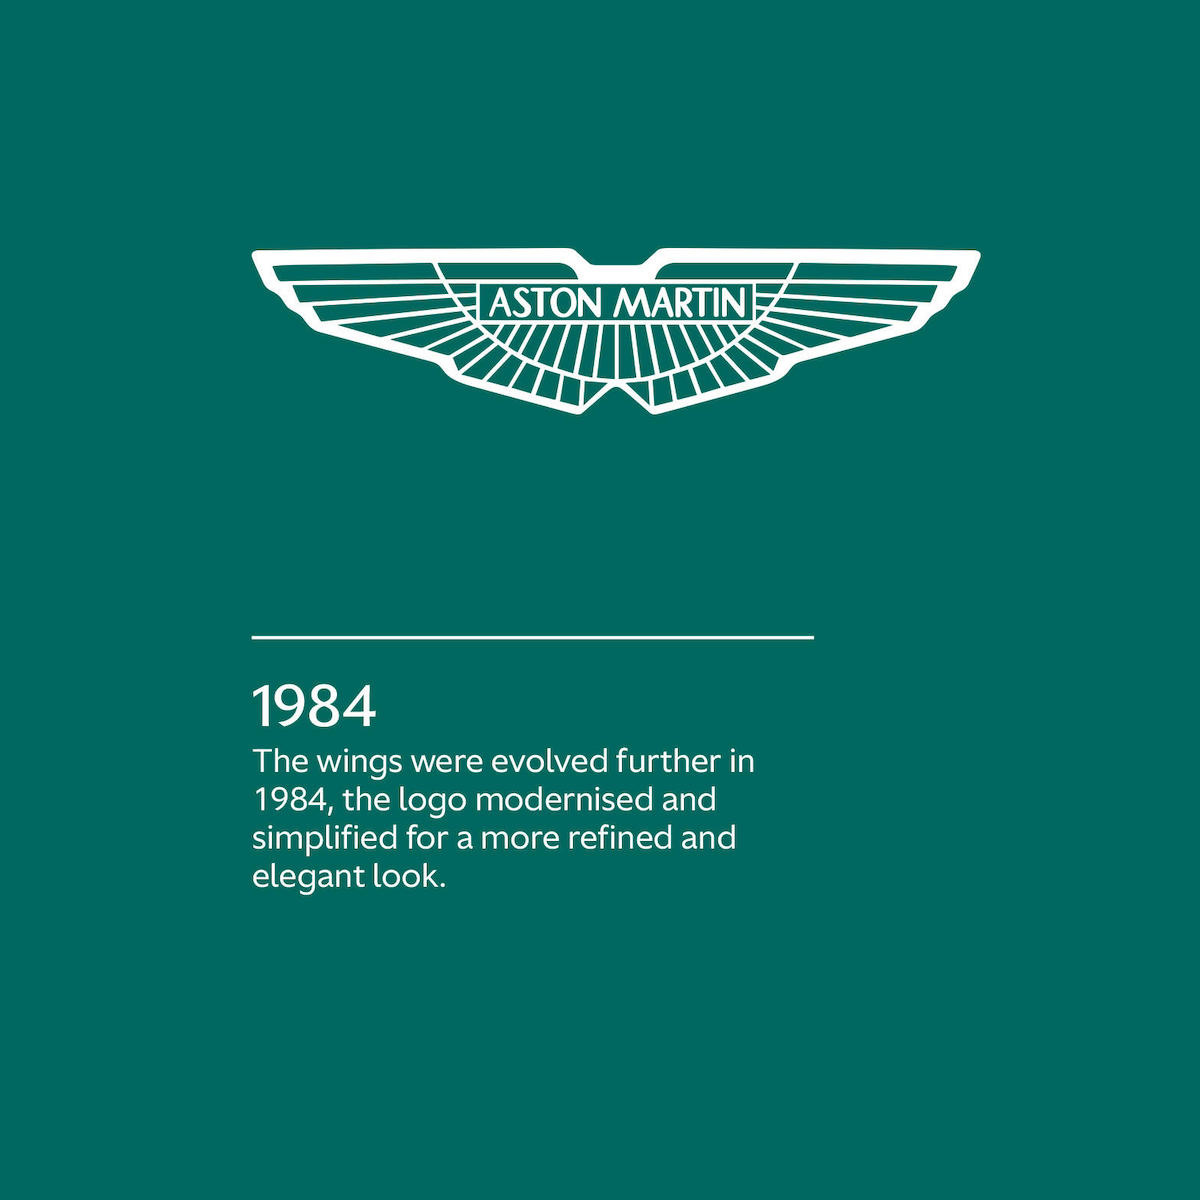 The 1984 version of the Aston Martin wings logo